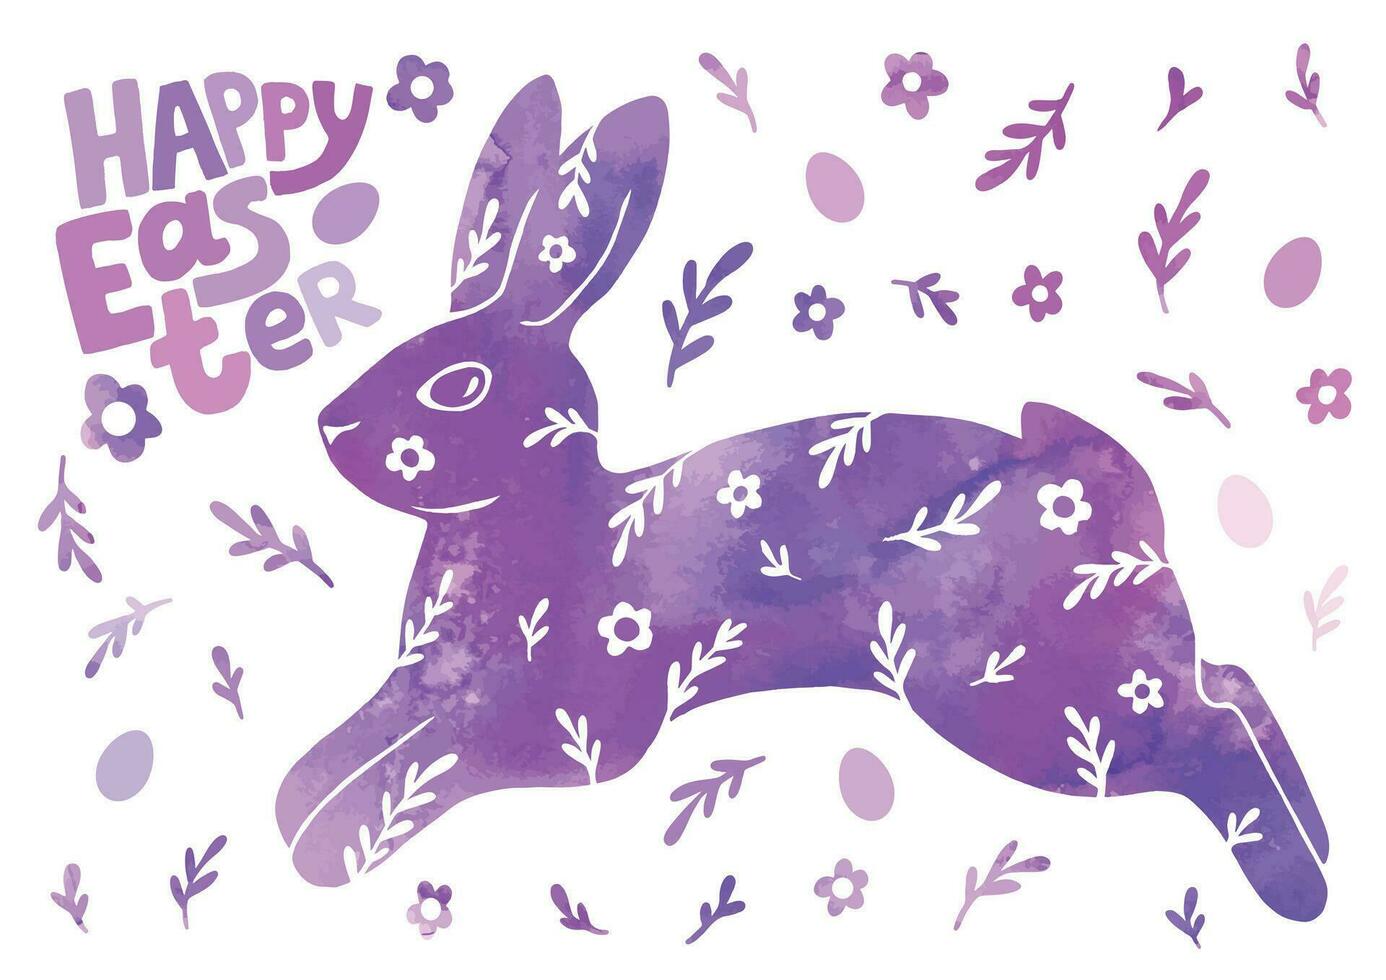 Happy Easter card. Watercolor drawing of a rabbit, flowers, eggs, and text. Gentle beautiful vector illustration.